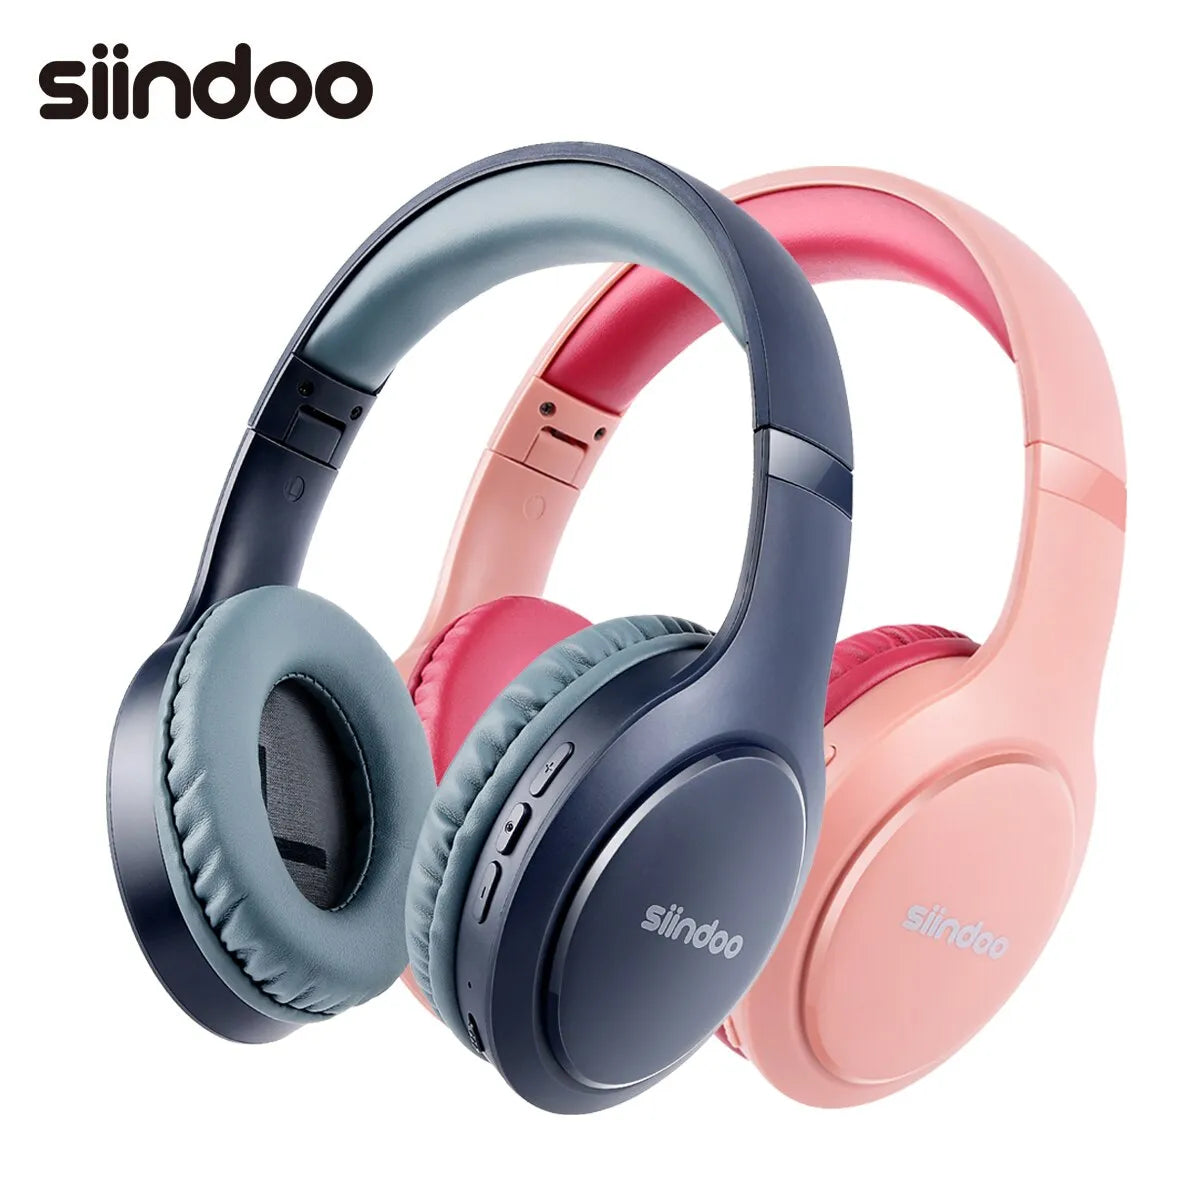 JH-919 Wireless Bluetoo Siindoo th Headphones Pink&Blue Foldable Stereo Earphones Super Bass Noise Cancelling Mic For Laptop TV